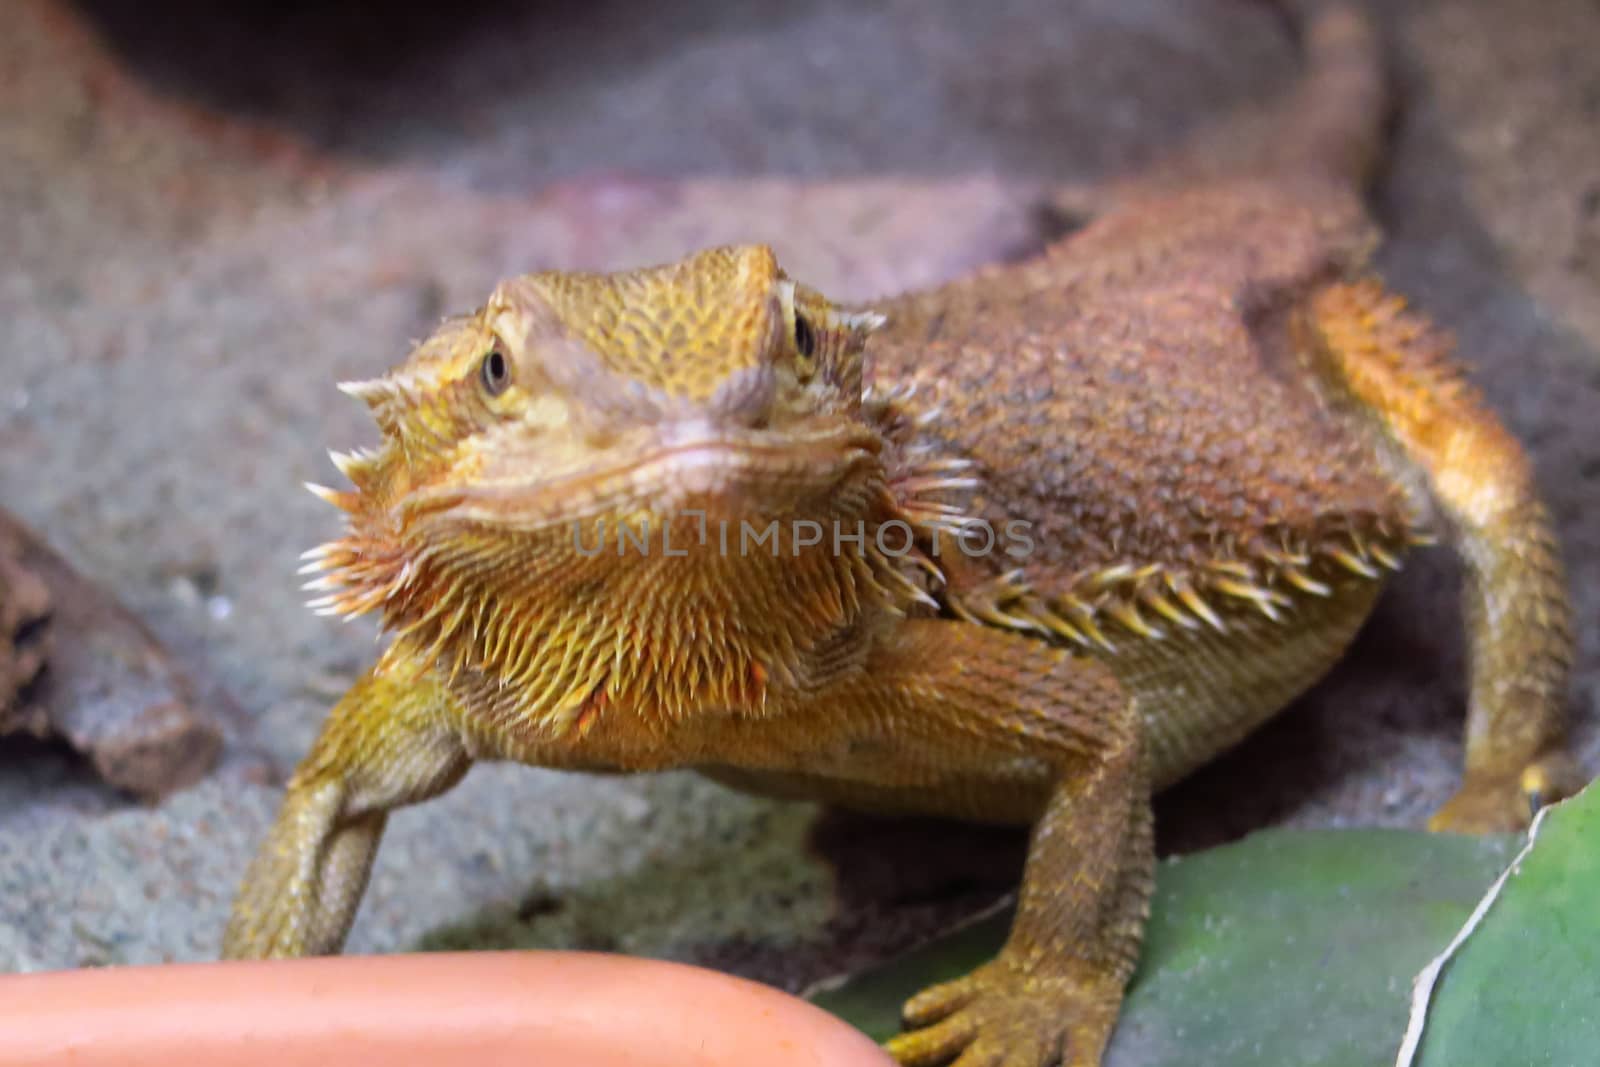 Fine example of a bearded dragon